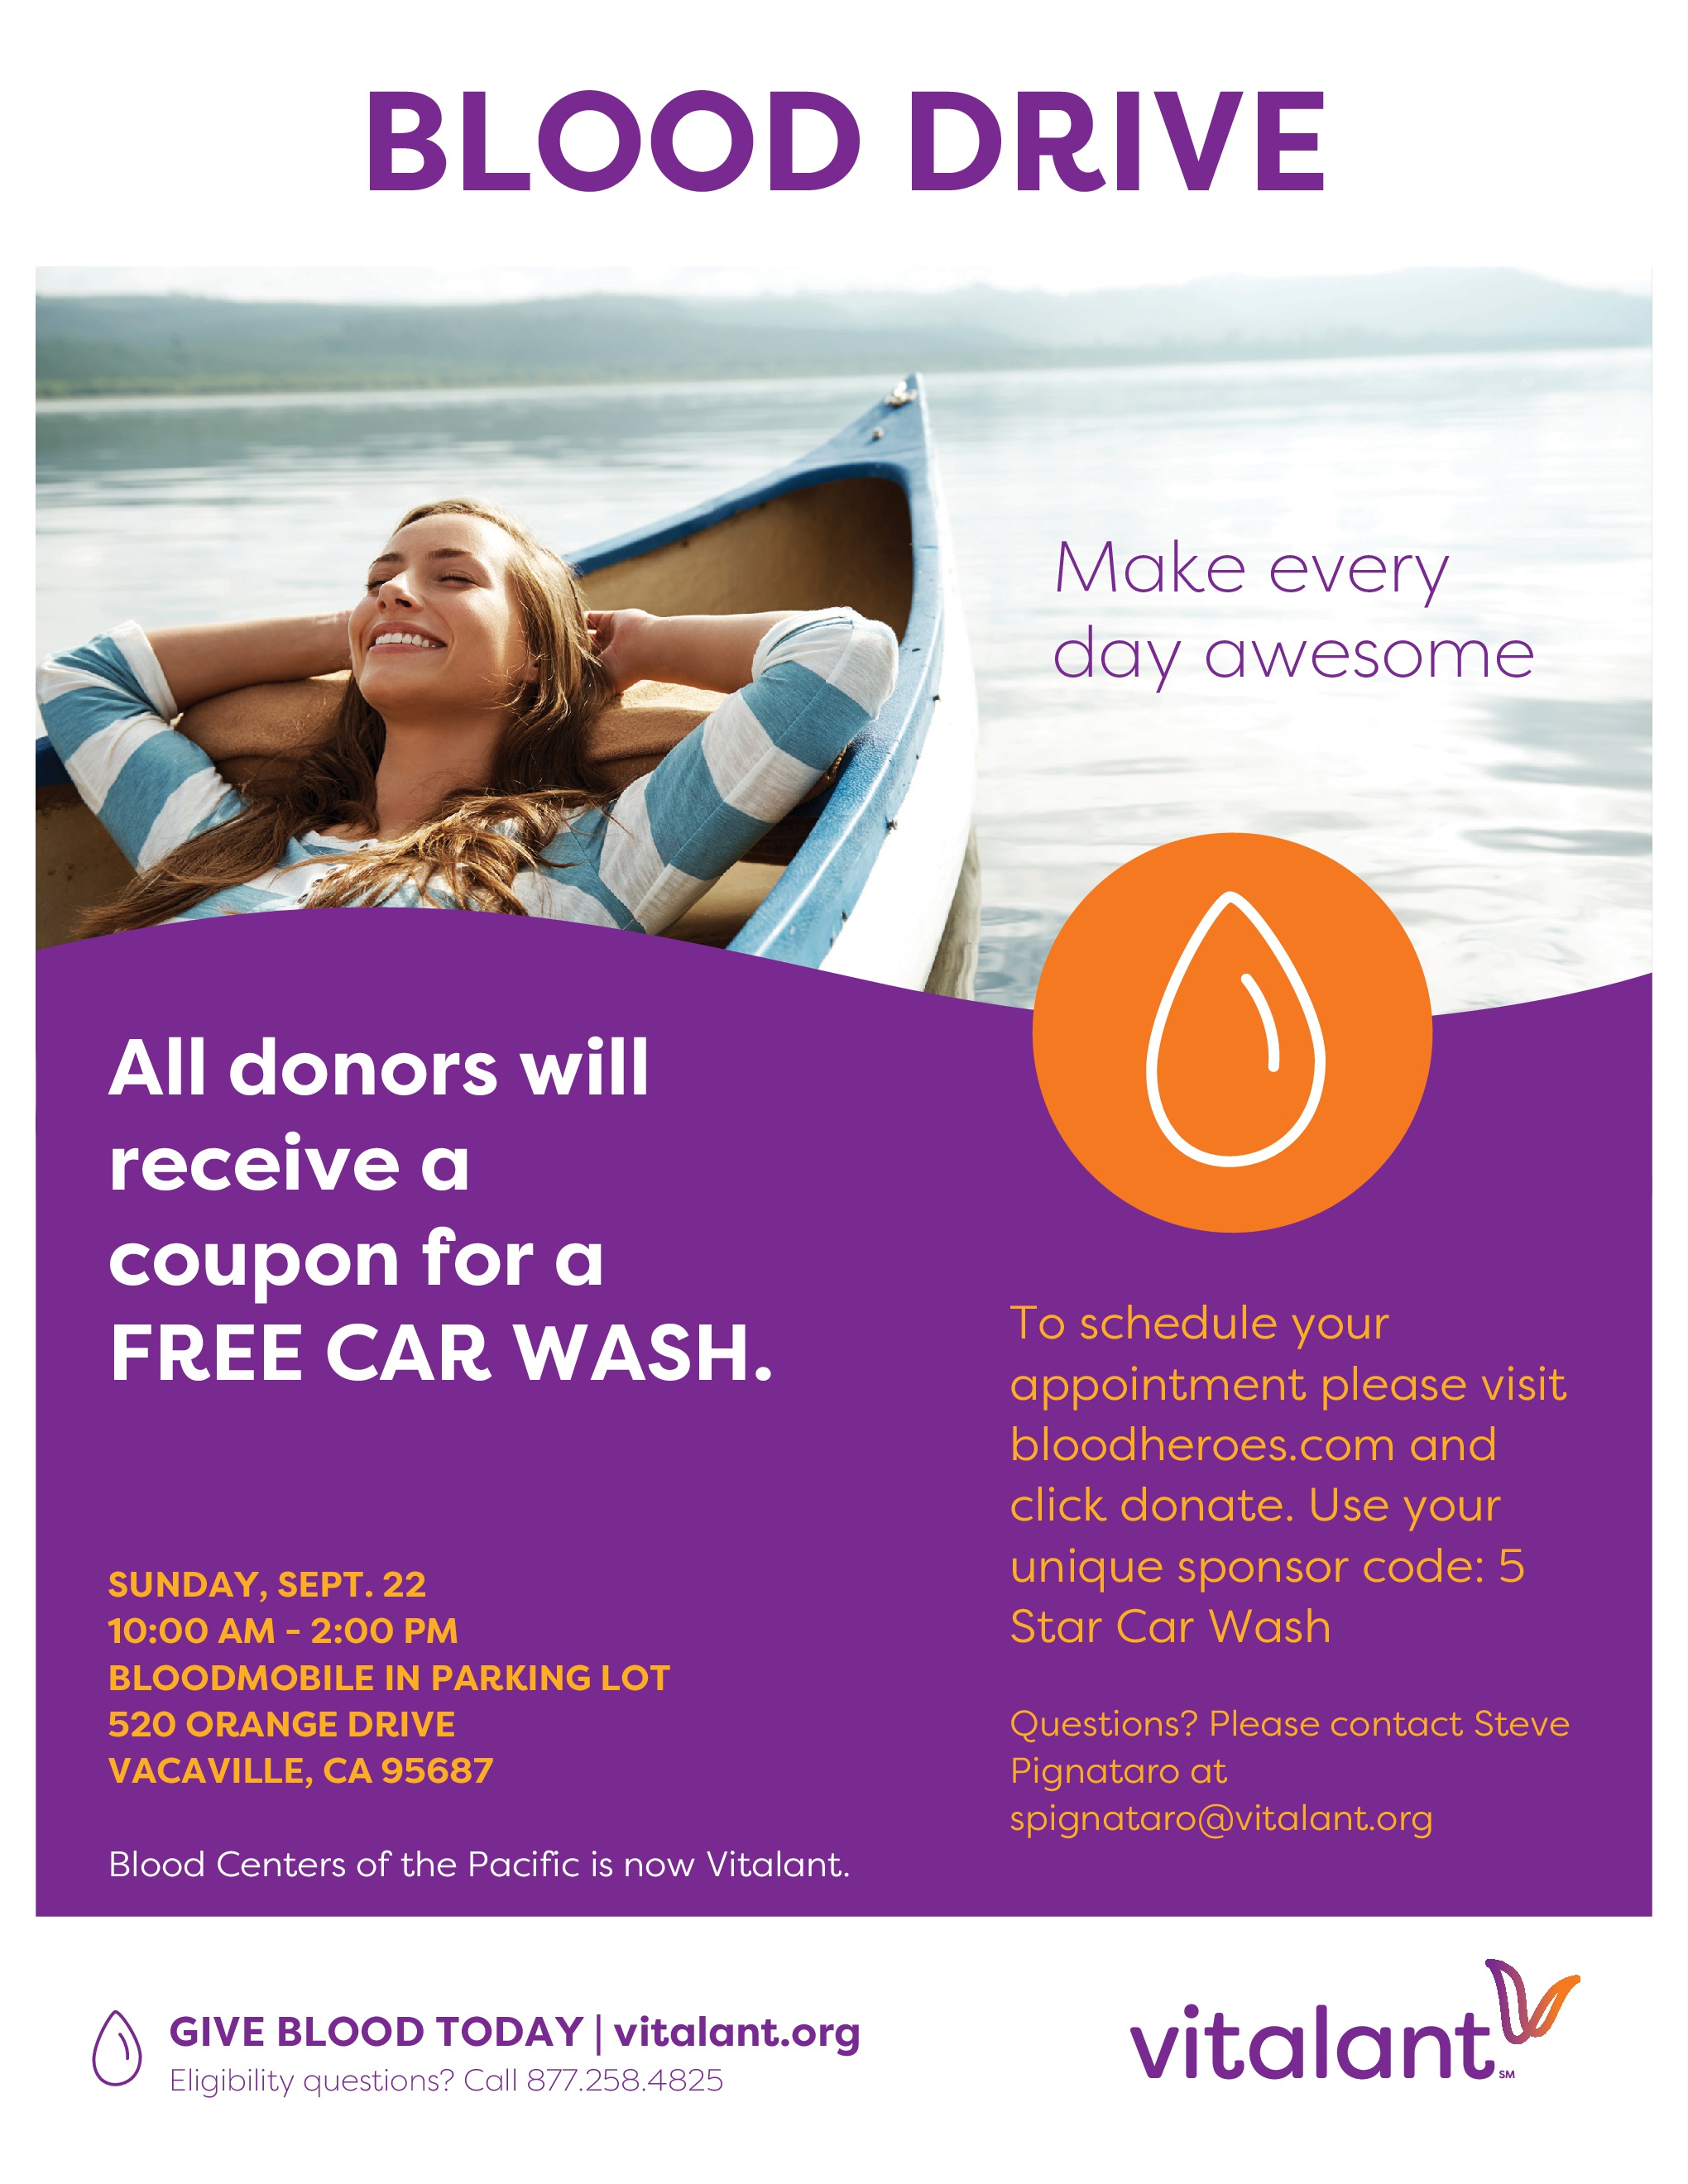 Vitalant and 5 Star Car Wash Partner for a Blood Drive on September 22th, 2019